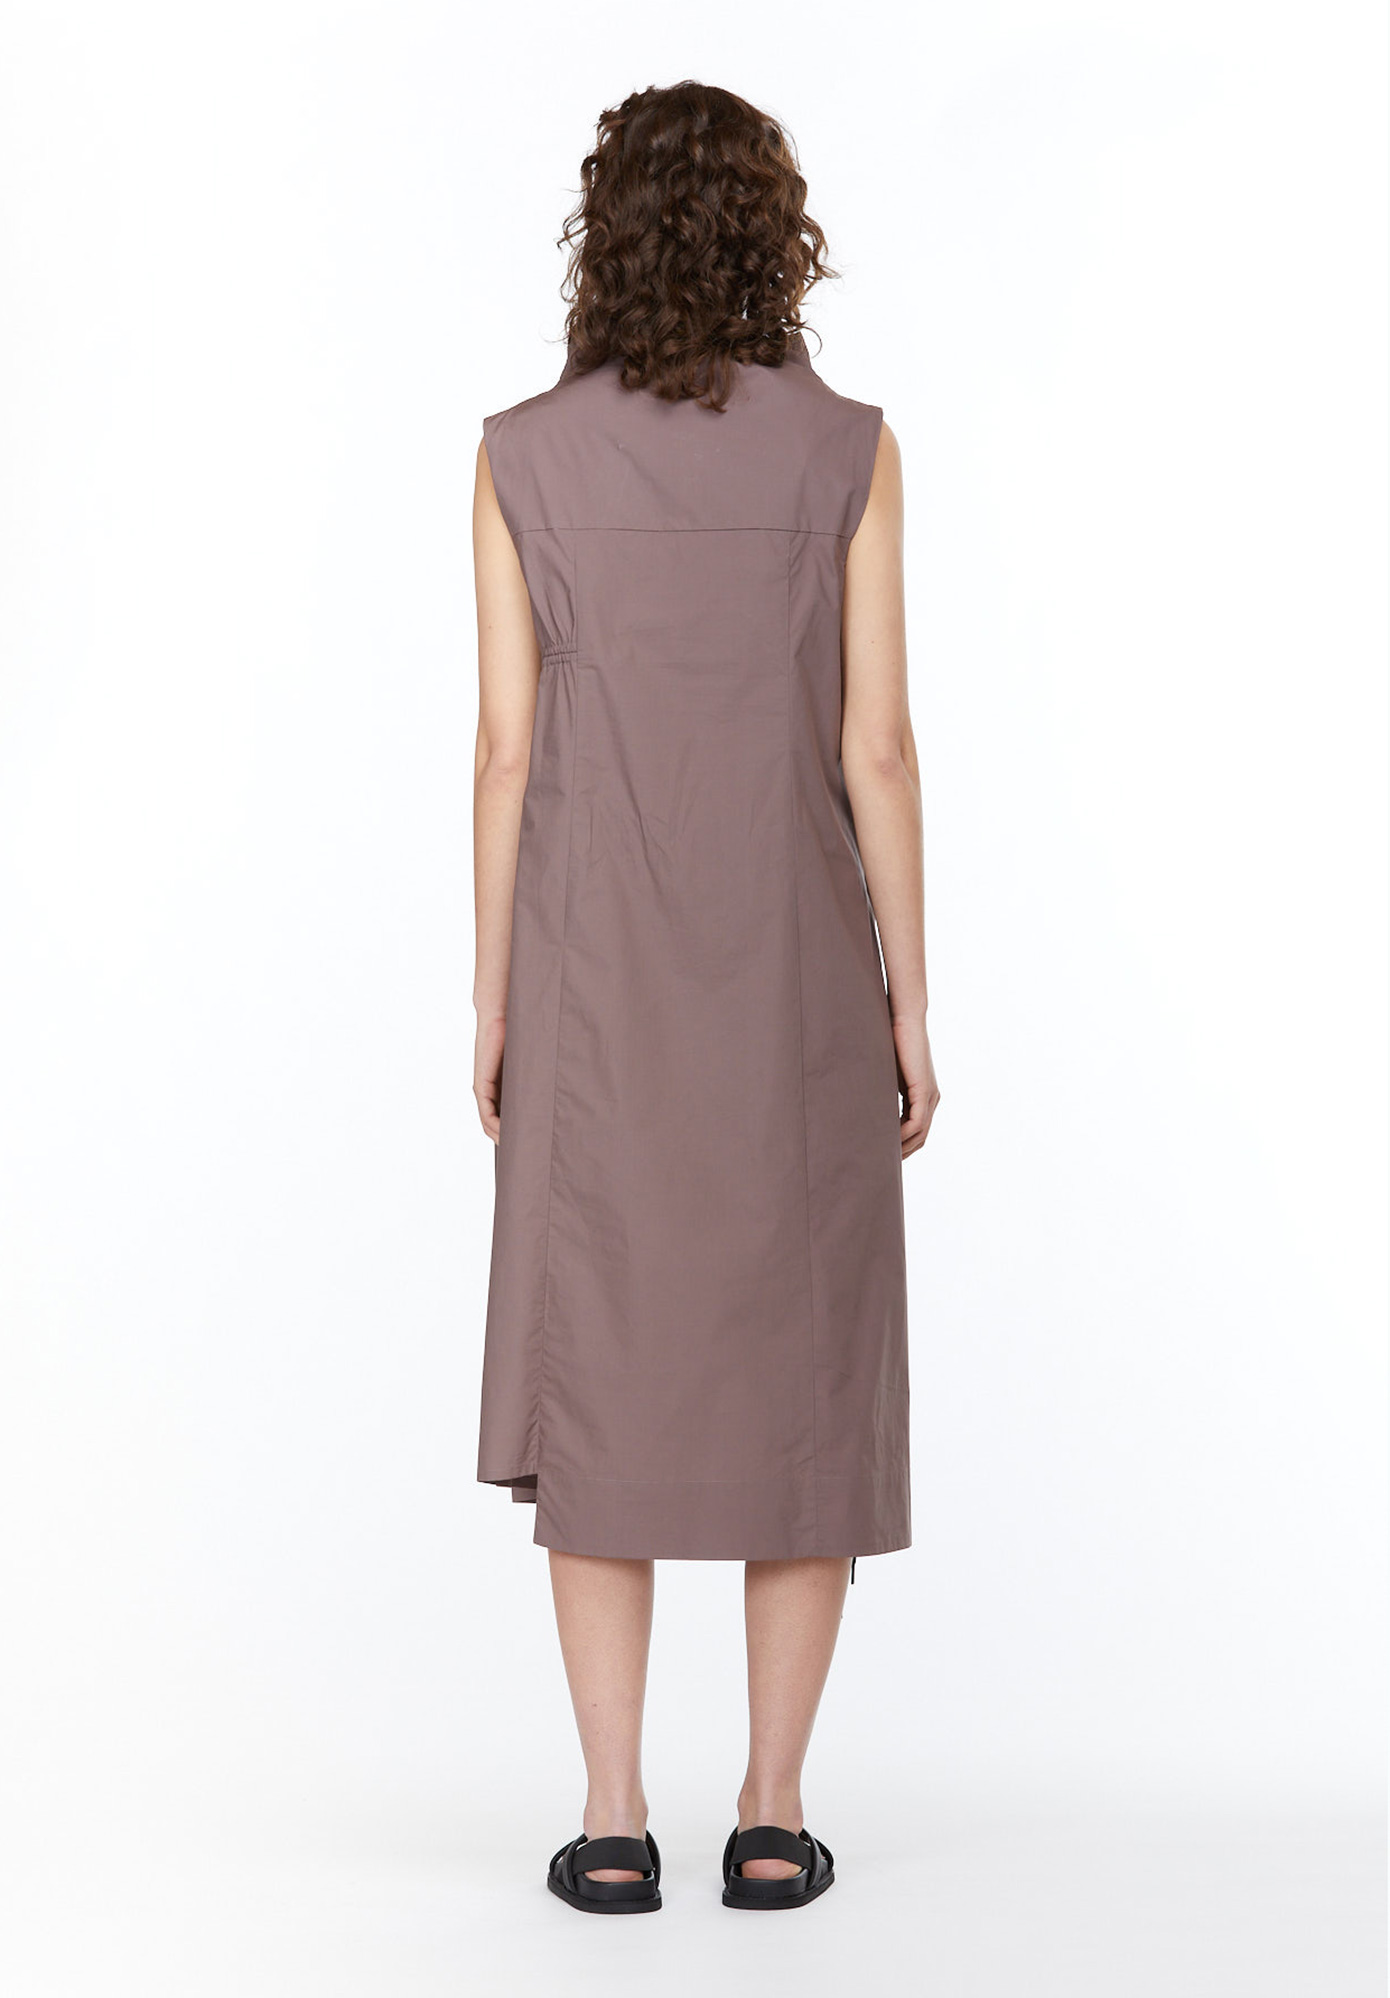 INTERVAL CHANNEL DRESS - SEPIA